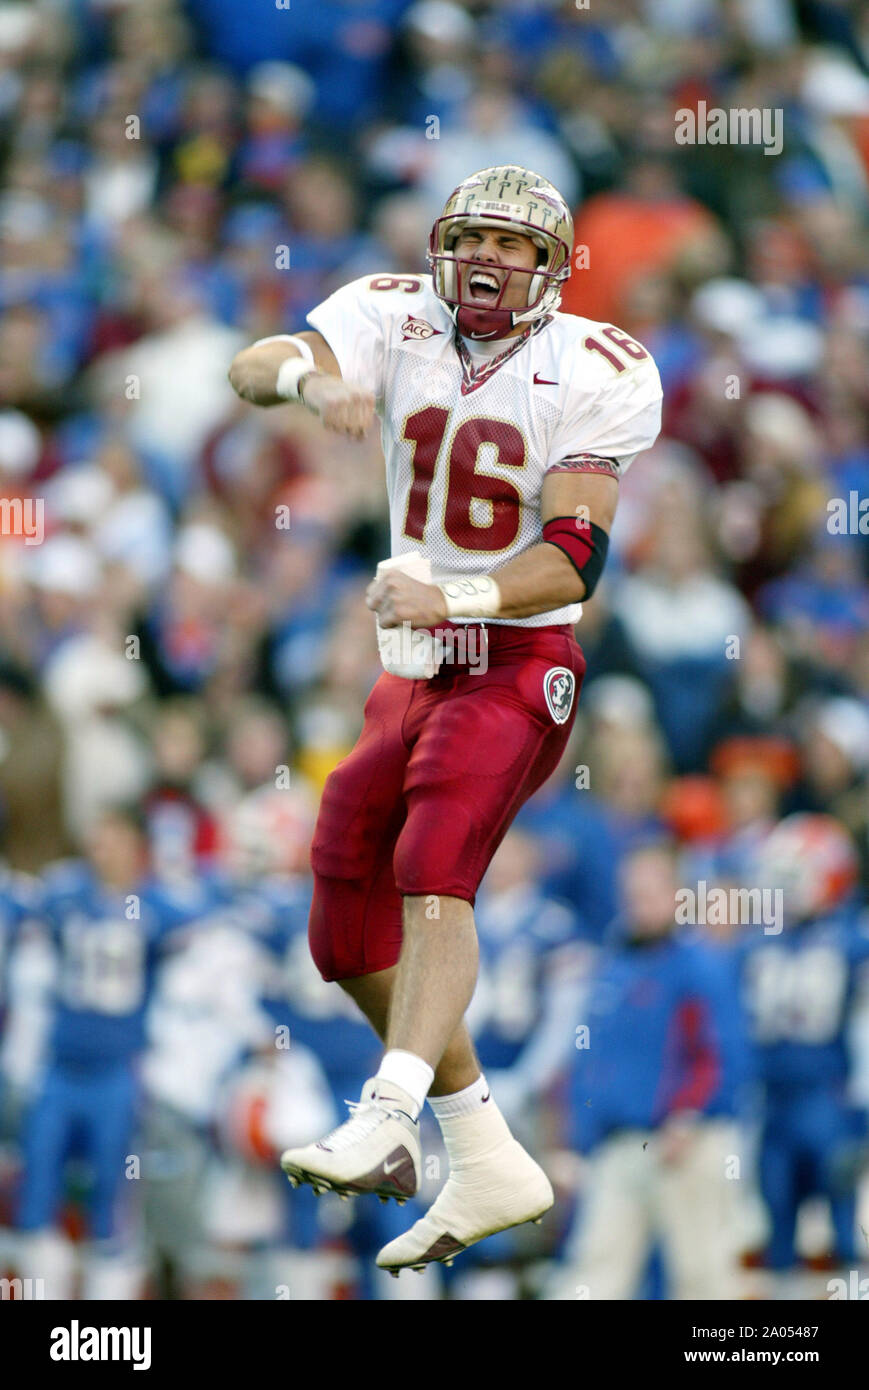 Florida State quarterback Chris Rix celebrates a second quarter touchdown during the Seminole's 38-34 victory over the Gators Saturday, November 29, 2003, at Ben Hill Griffin Stadium in Gainesville, Florida. Stock Photo